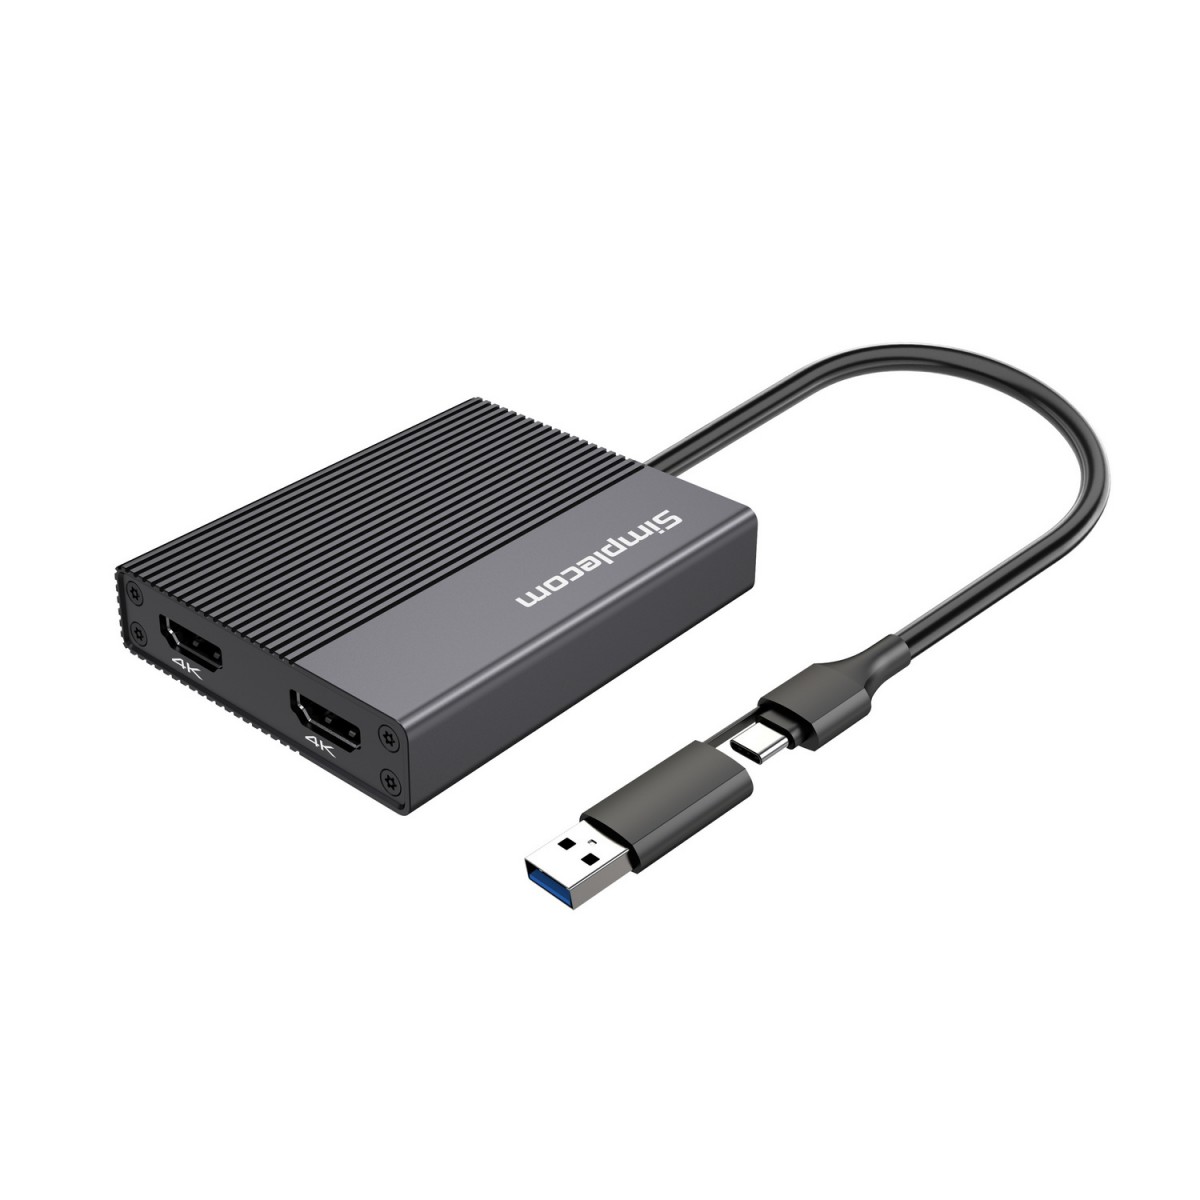  USB 3.0 or USB-C Type-C to Dual 4K HDMI 2.0 Display Adapter for 2x 4K@60Hz Extended Screens  